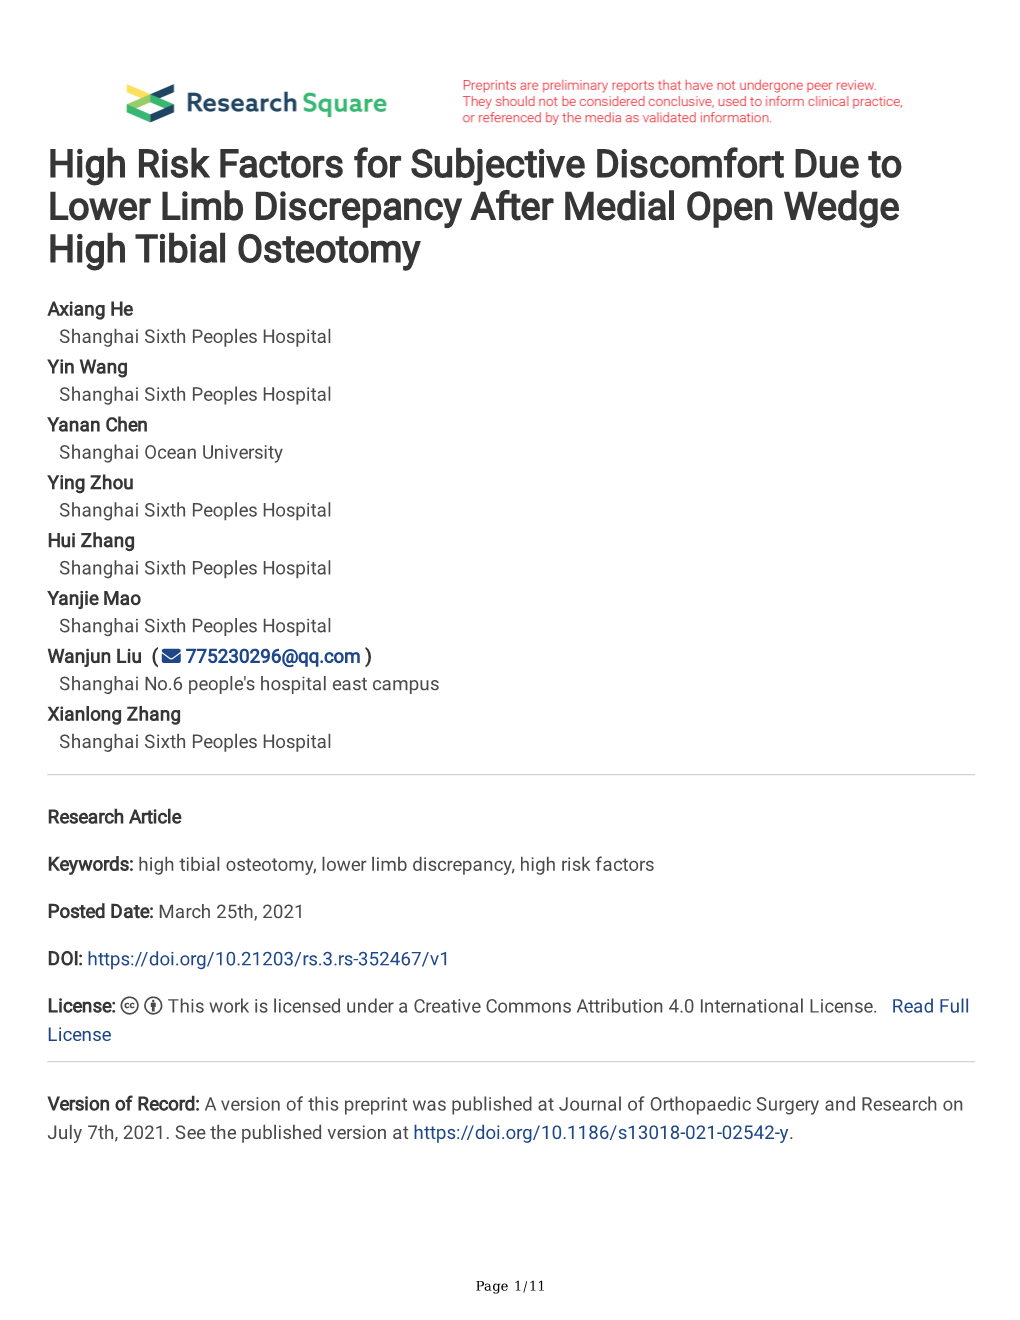 High Risk Factors for Subjective Discomfort Due to Lower Limb Discrepancy After Medial Open Wedge High Tibial Osteotomy